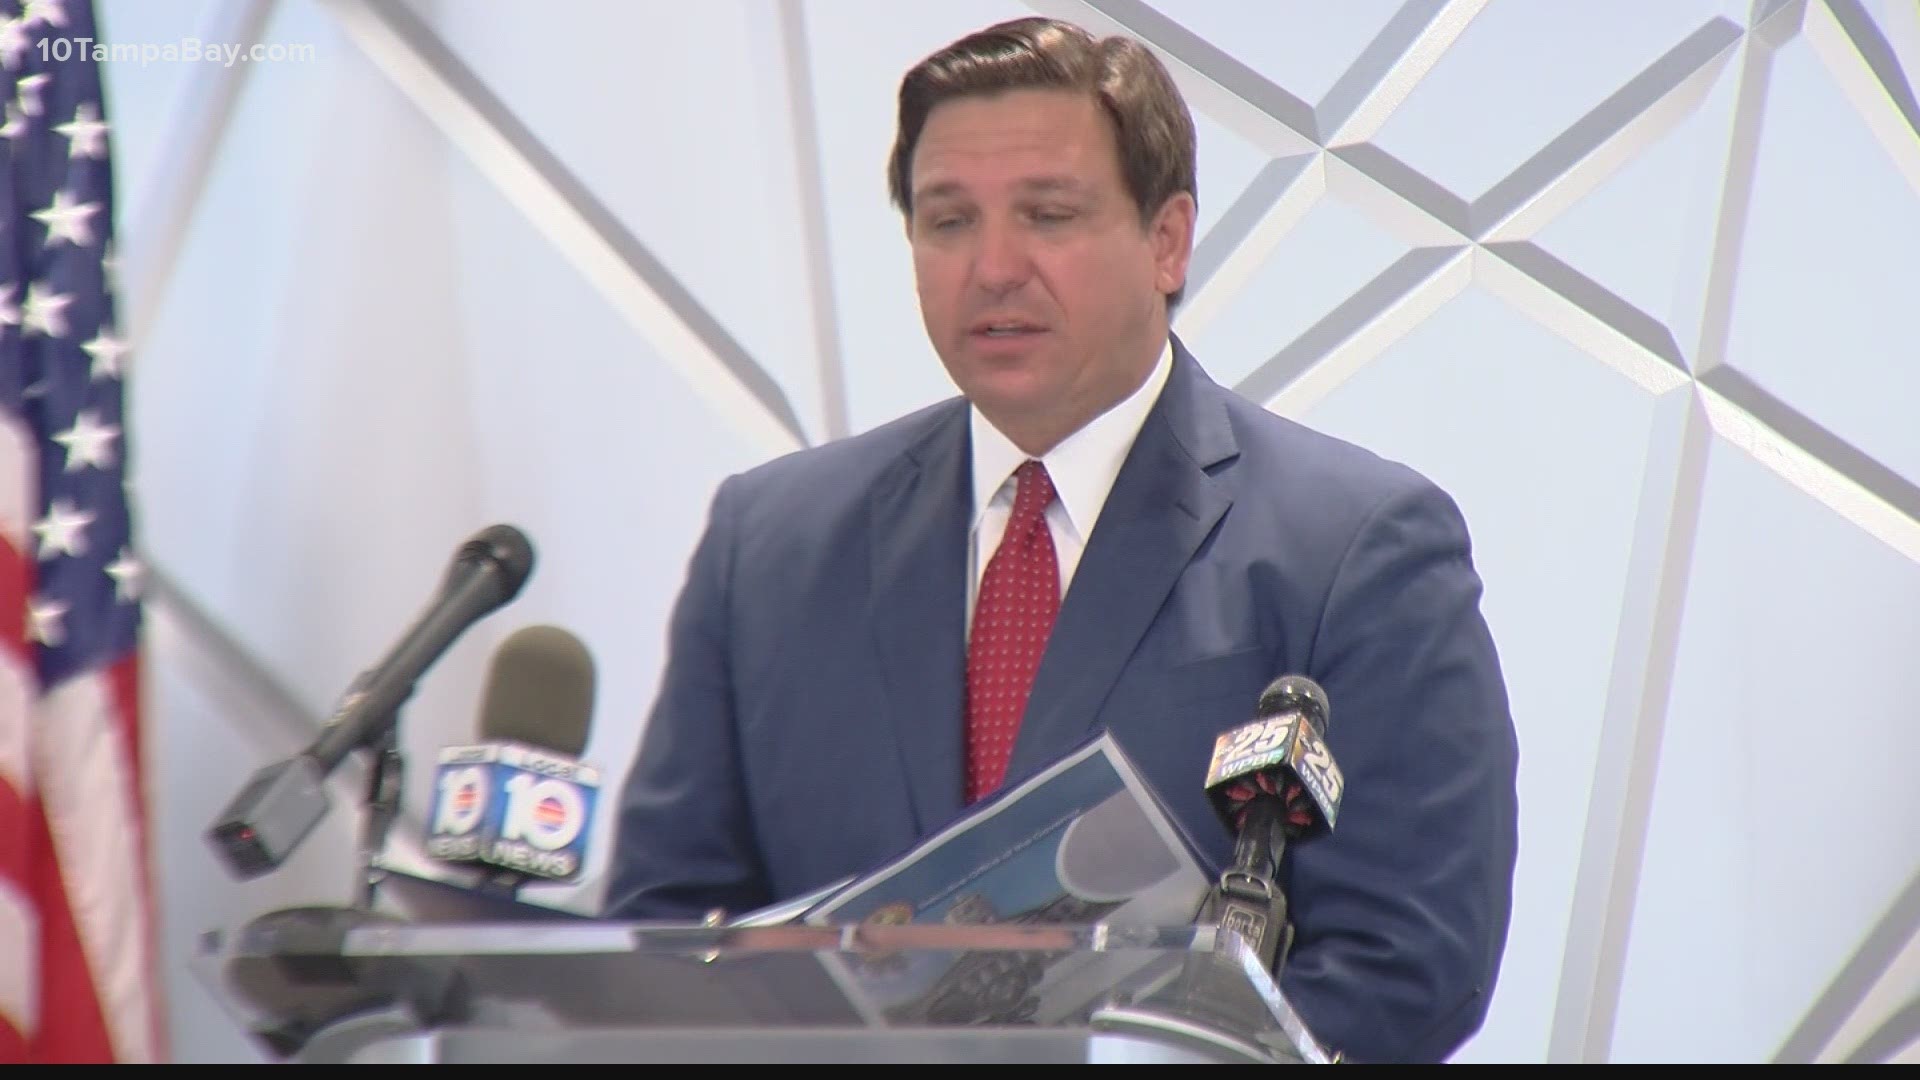 "We don't have enough vaccine currently on hand for all 4 million plus senior citizens" said DeSantis.